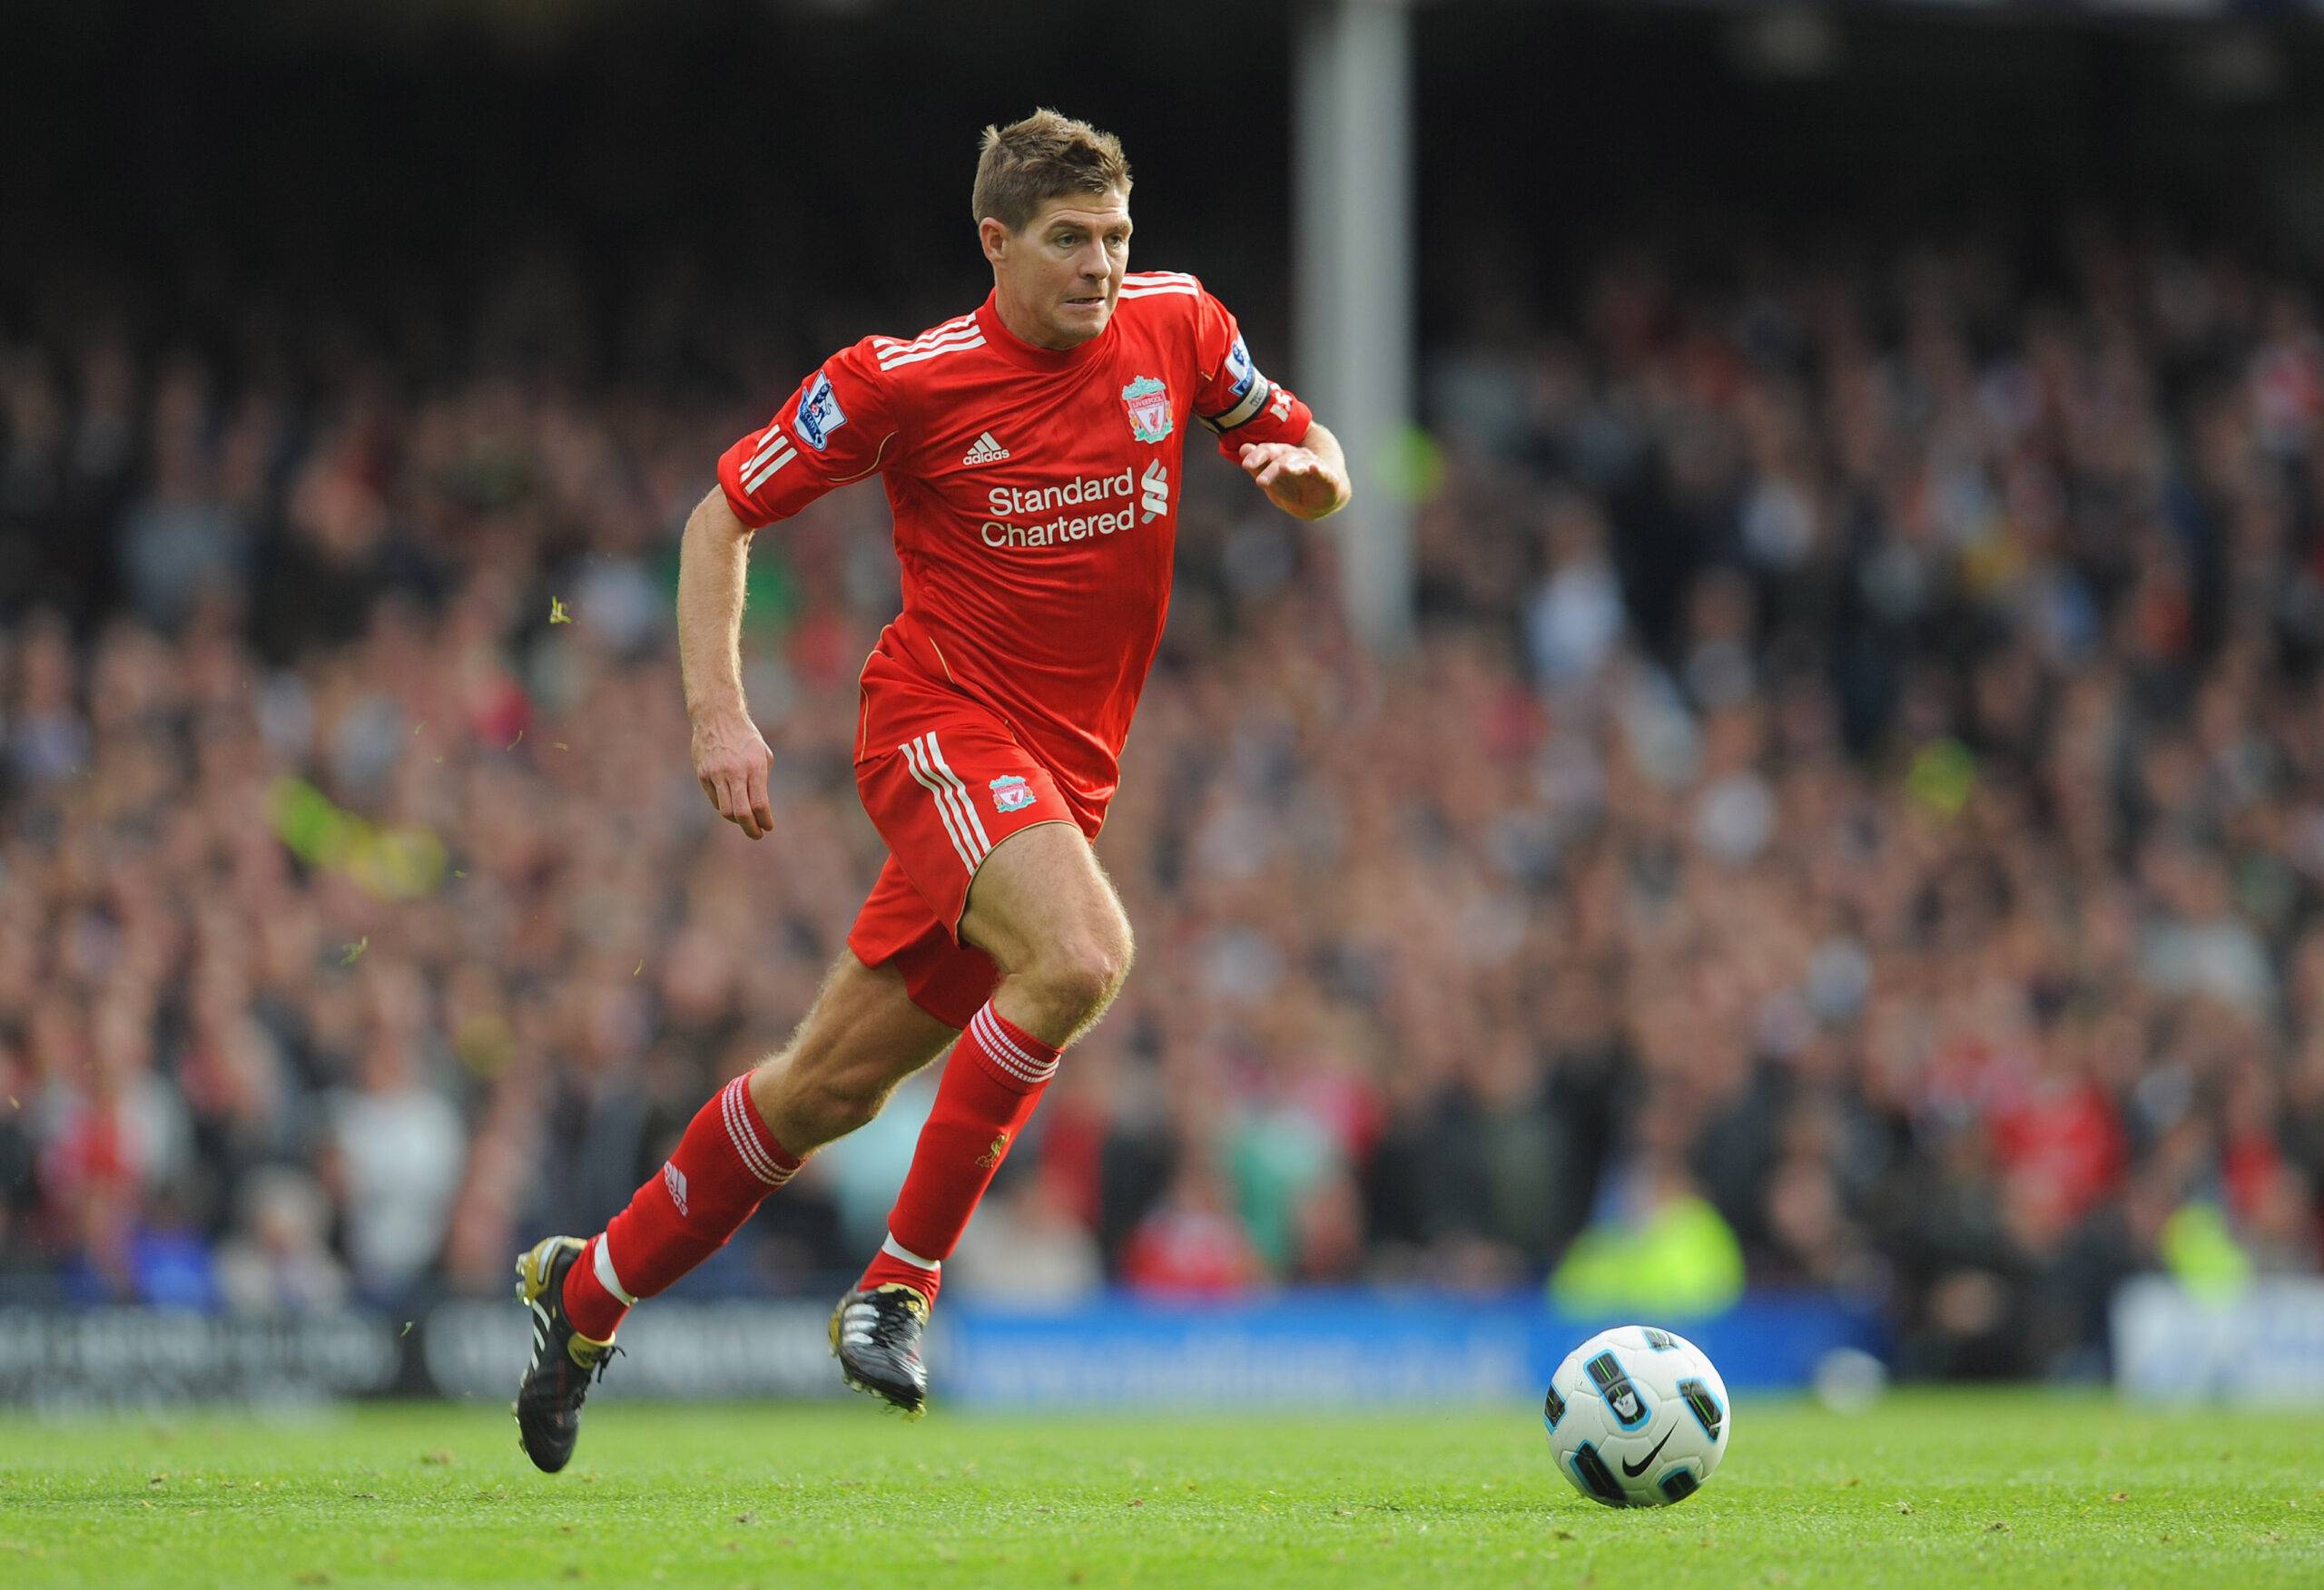 Gerrard in action at Everton for Liverpool in 2022